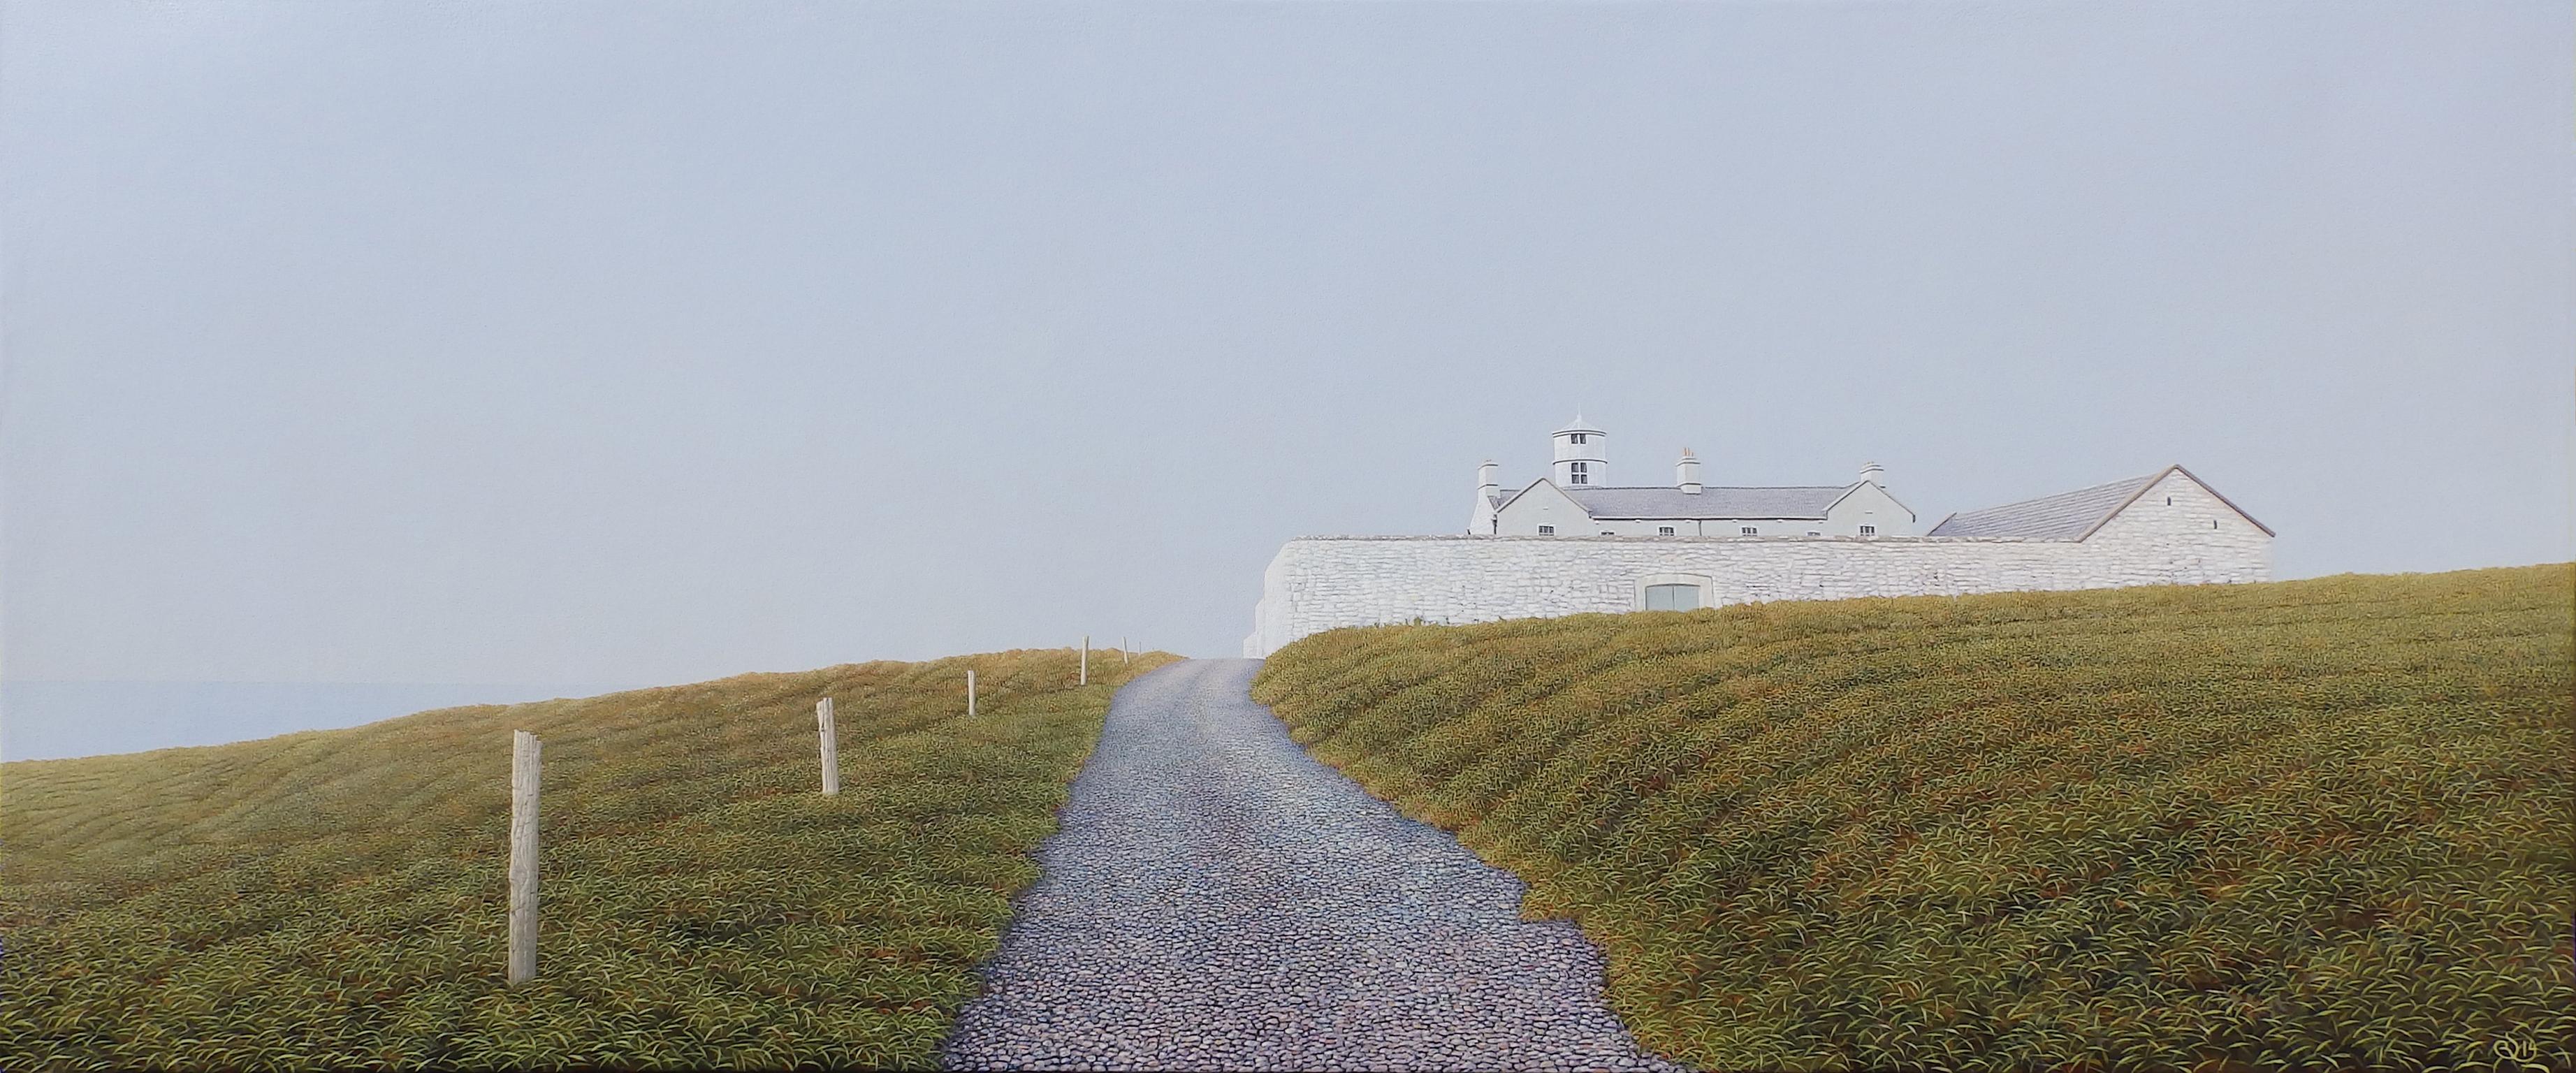 Reinder Ourensma Landscape Painting - Galley Head Lighthouse - Contemporary Hyper Realist Landscape Acrylic Painting